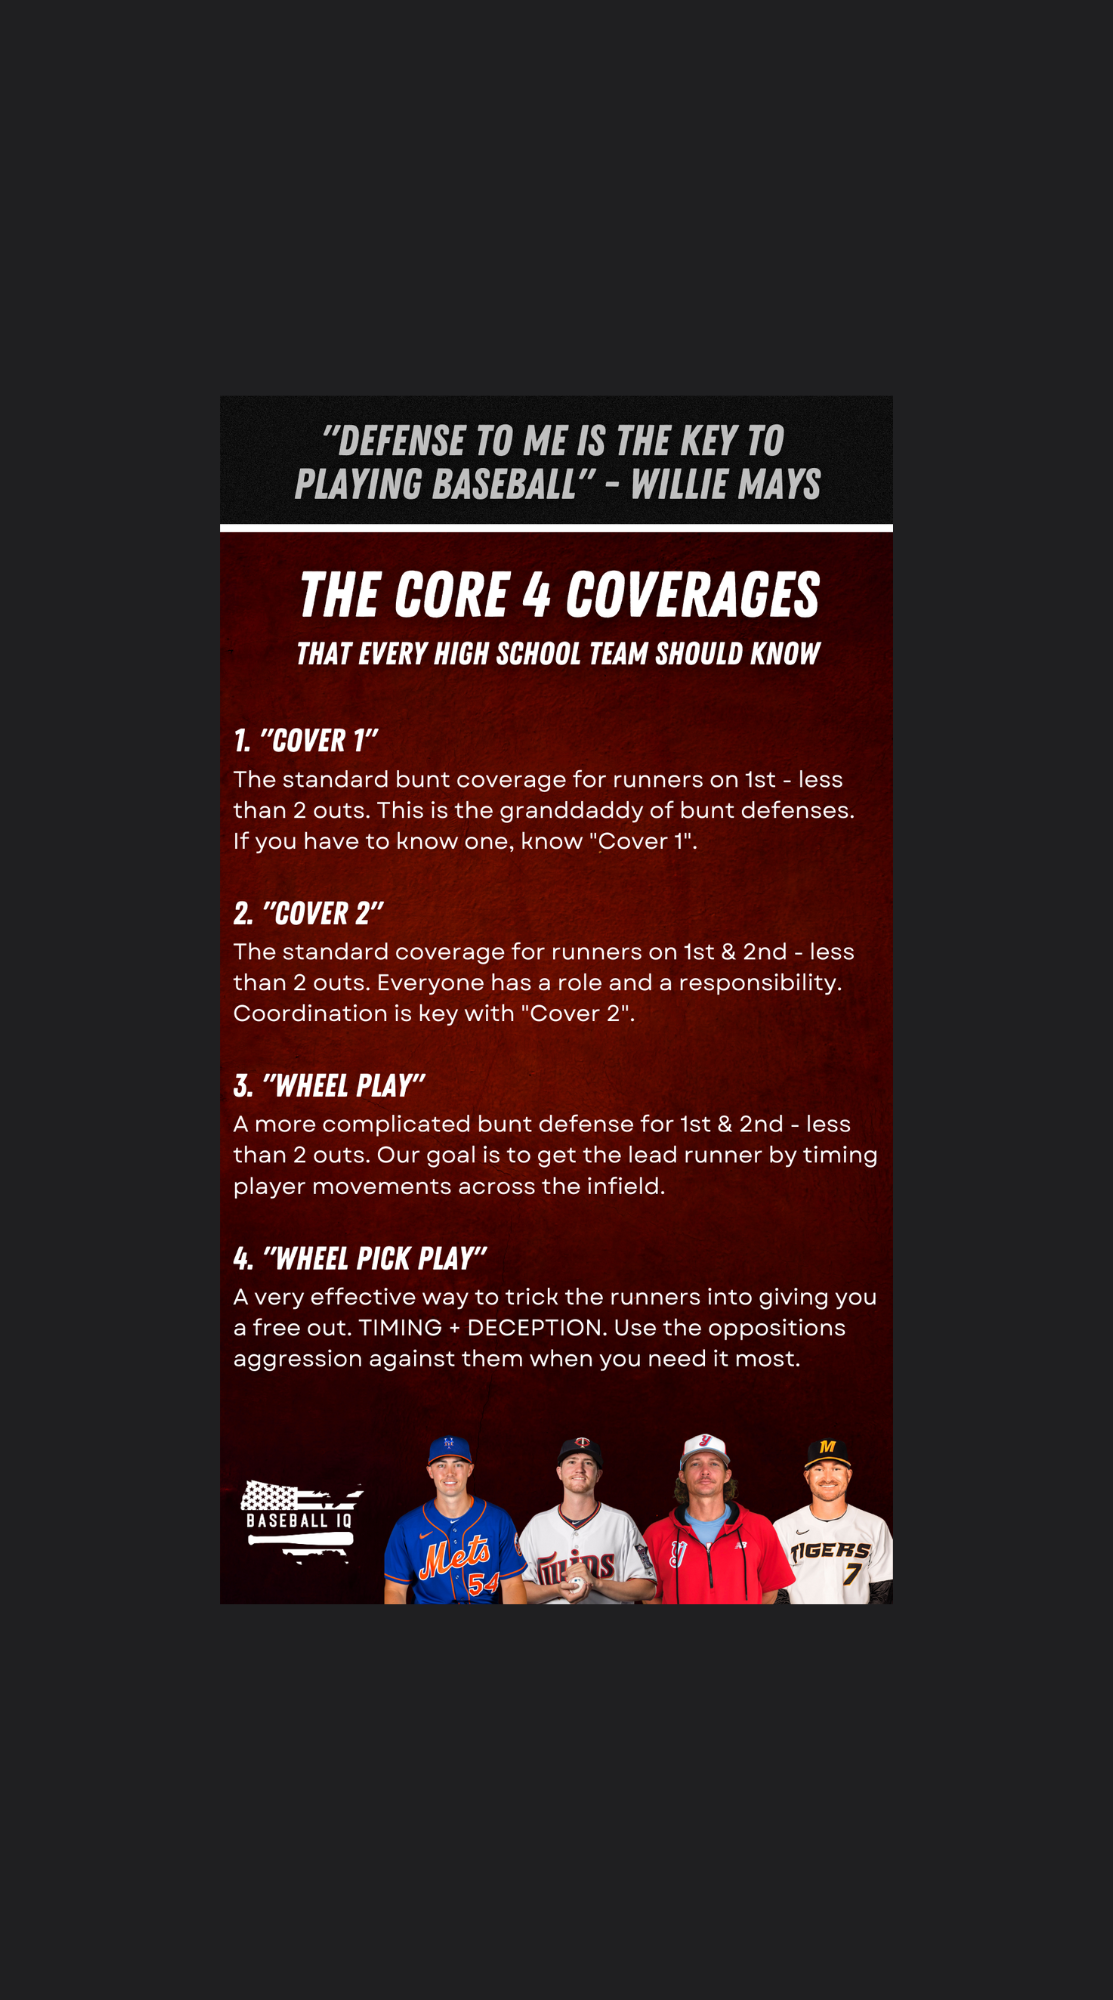 A Coach's Guide To Bunt Coverages